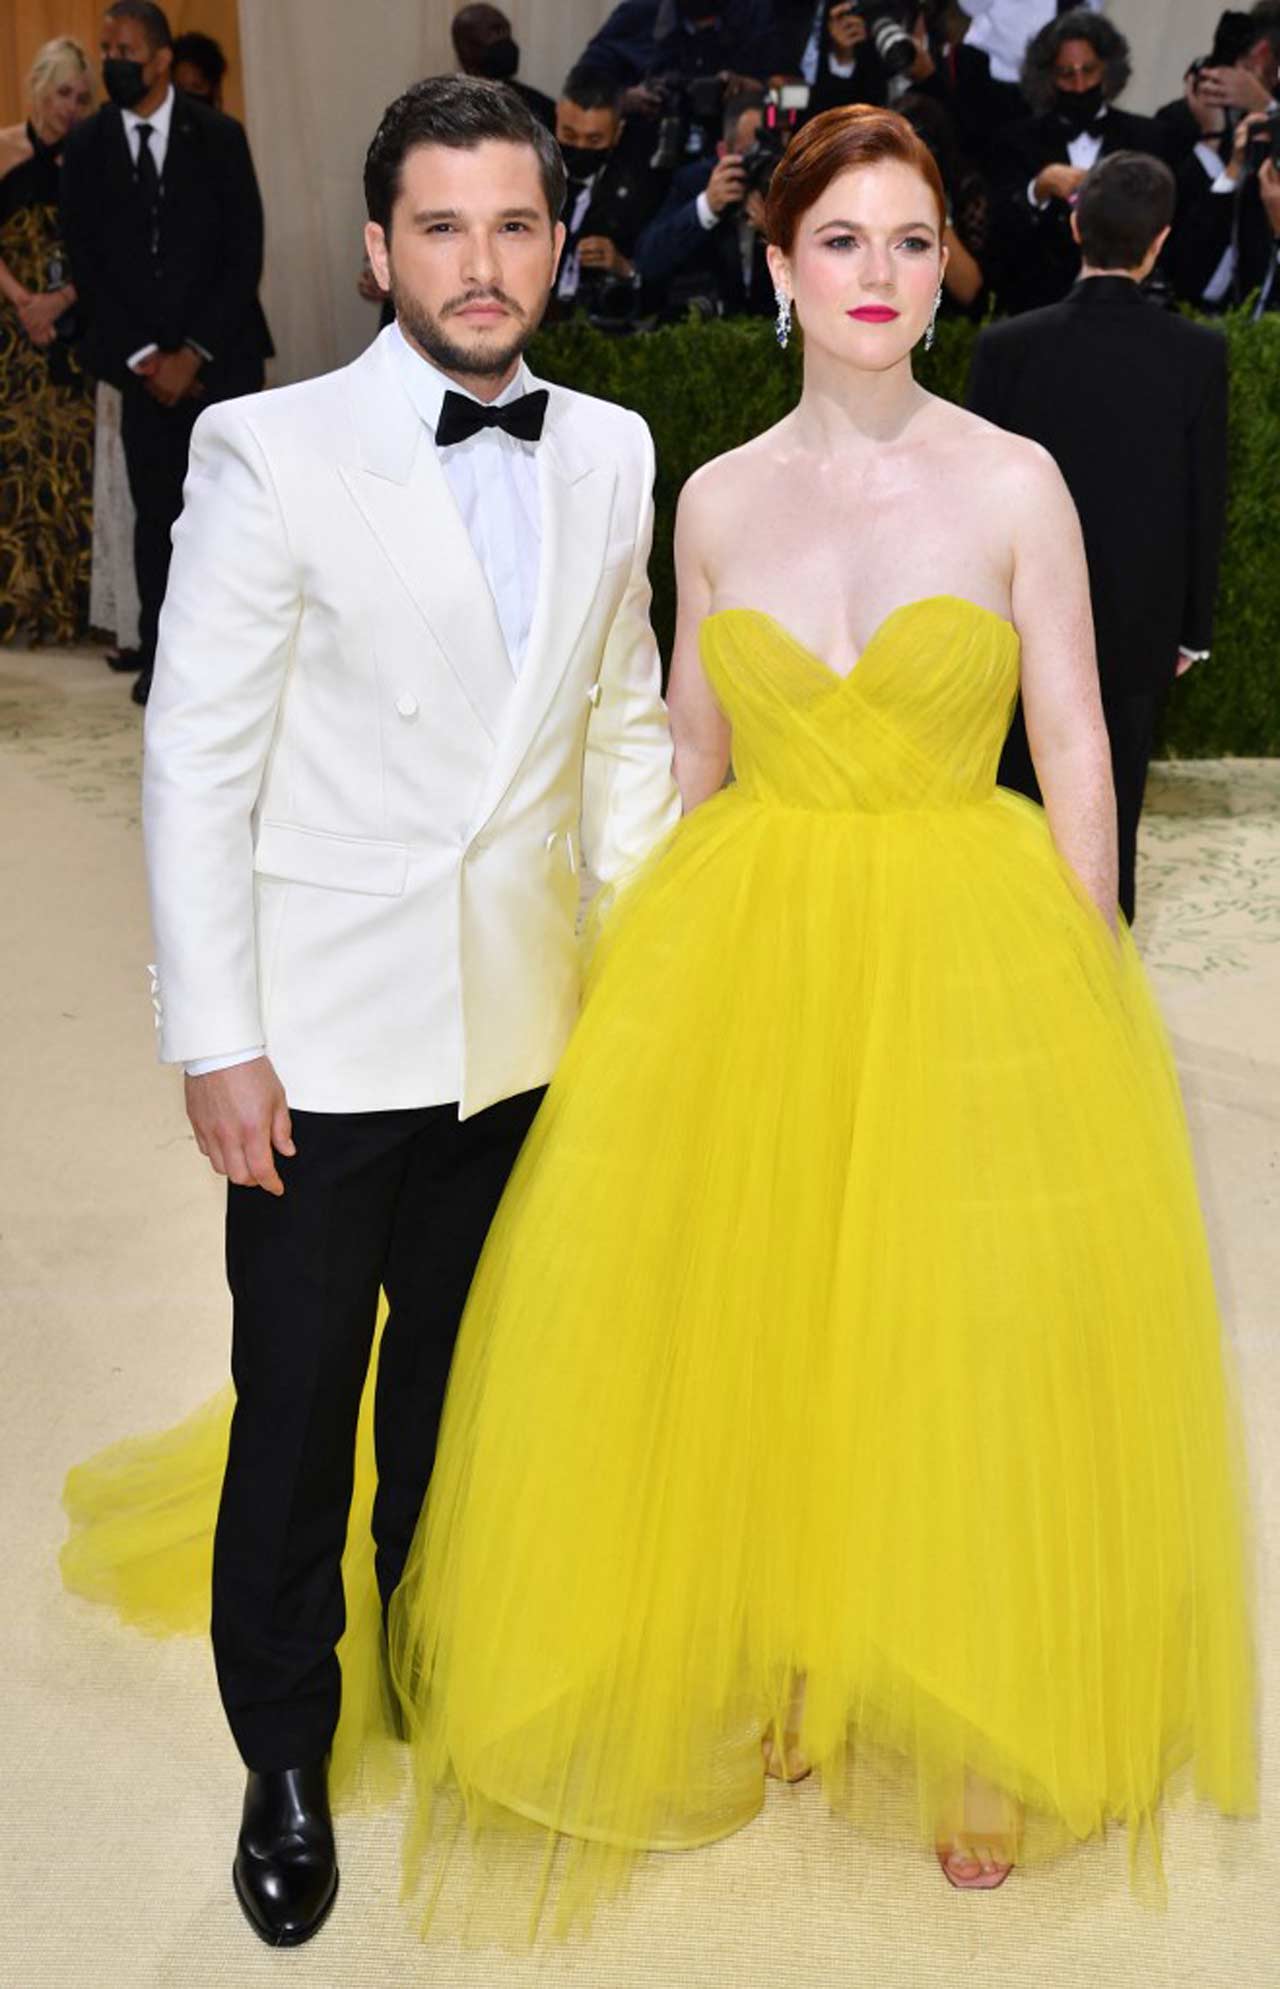 'Game of Thrones' stars and real life couple, Kit Harington and Rose Leslie, turned heads at the Met Gala 2021 with tributes to the 'In America: A Lexicon of Fashion' theme. 